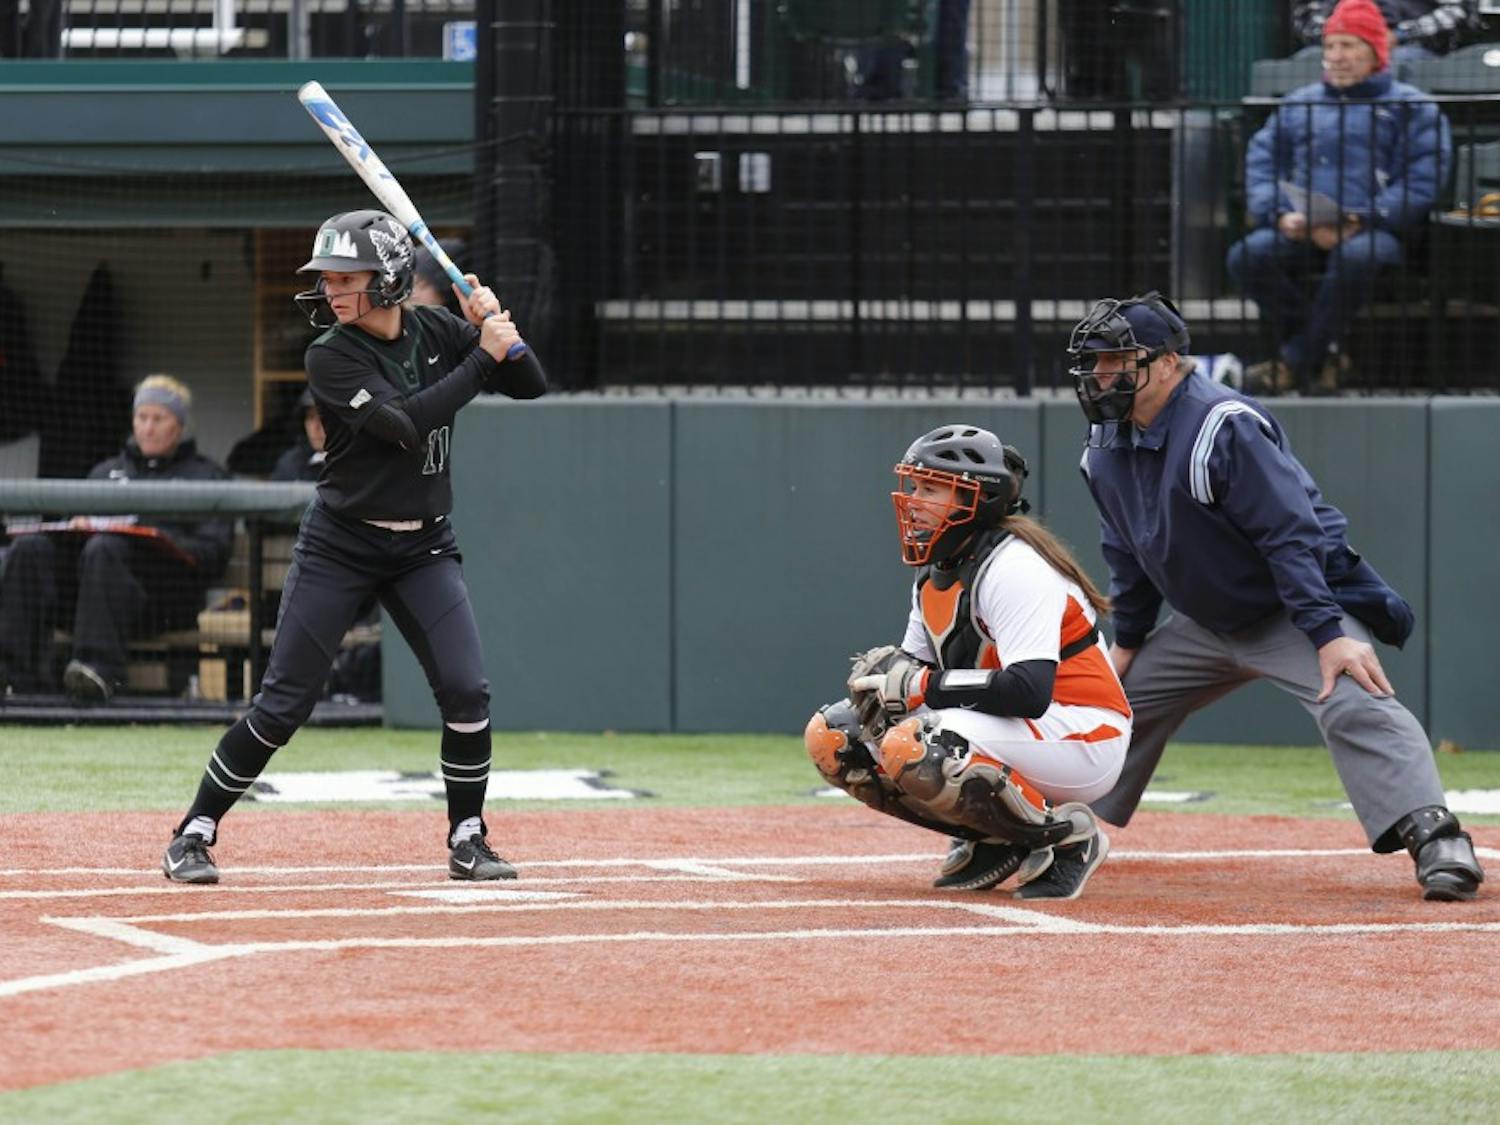 Softball is currently 10-13 overall and 4-2 in Ivy League play, winning two of three games in a series against both Columbia University and the University of Pennsylvania.